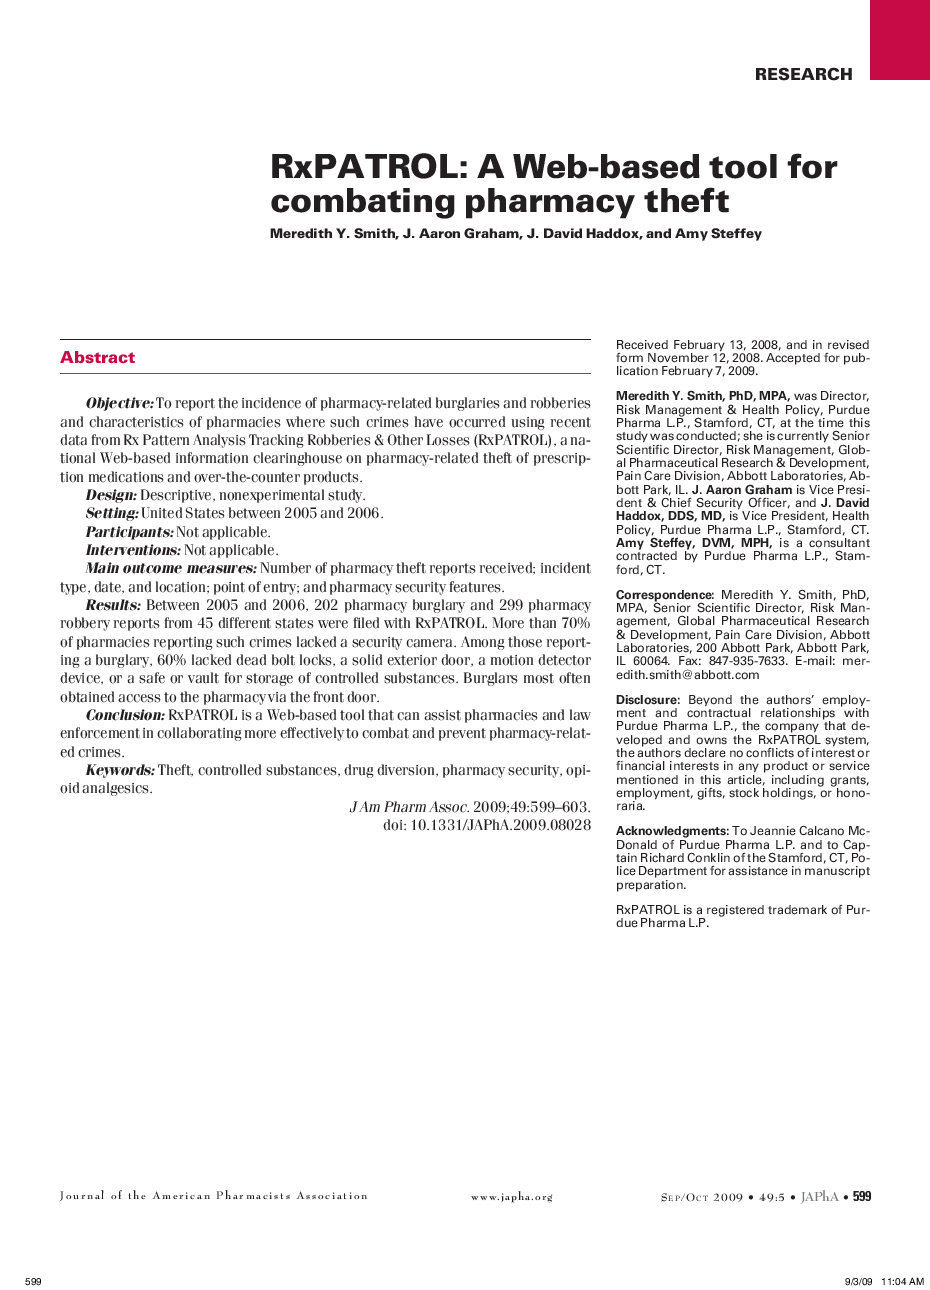 RxPATROL: A Web-based tool for combating pharmacy theft